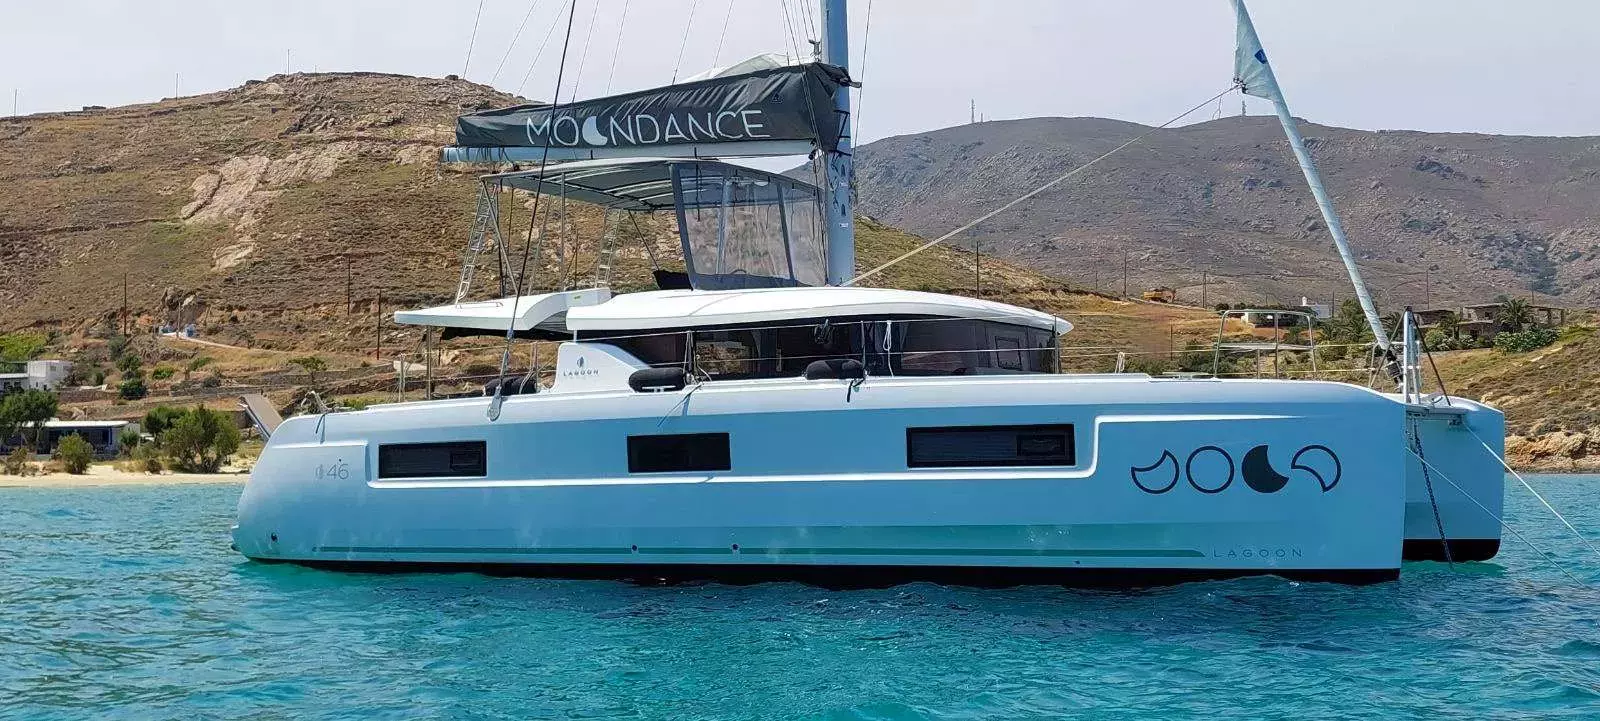 Moondance III by Lagoon - Top rates for a Rental of a private Power Catamaran in Greece